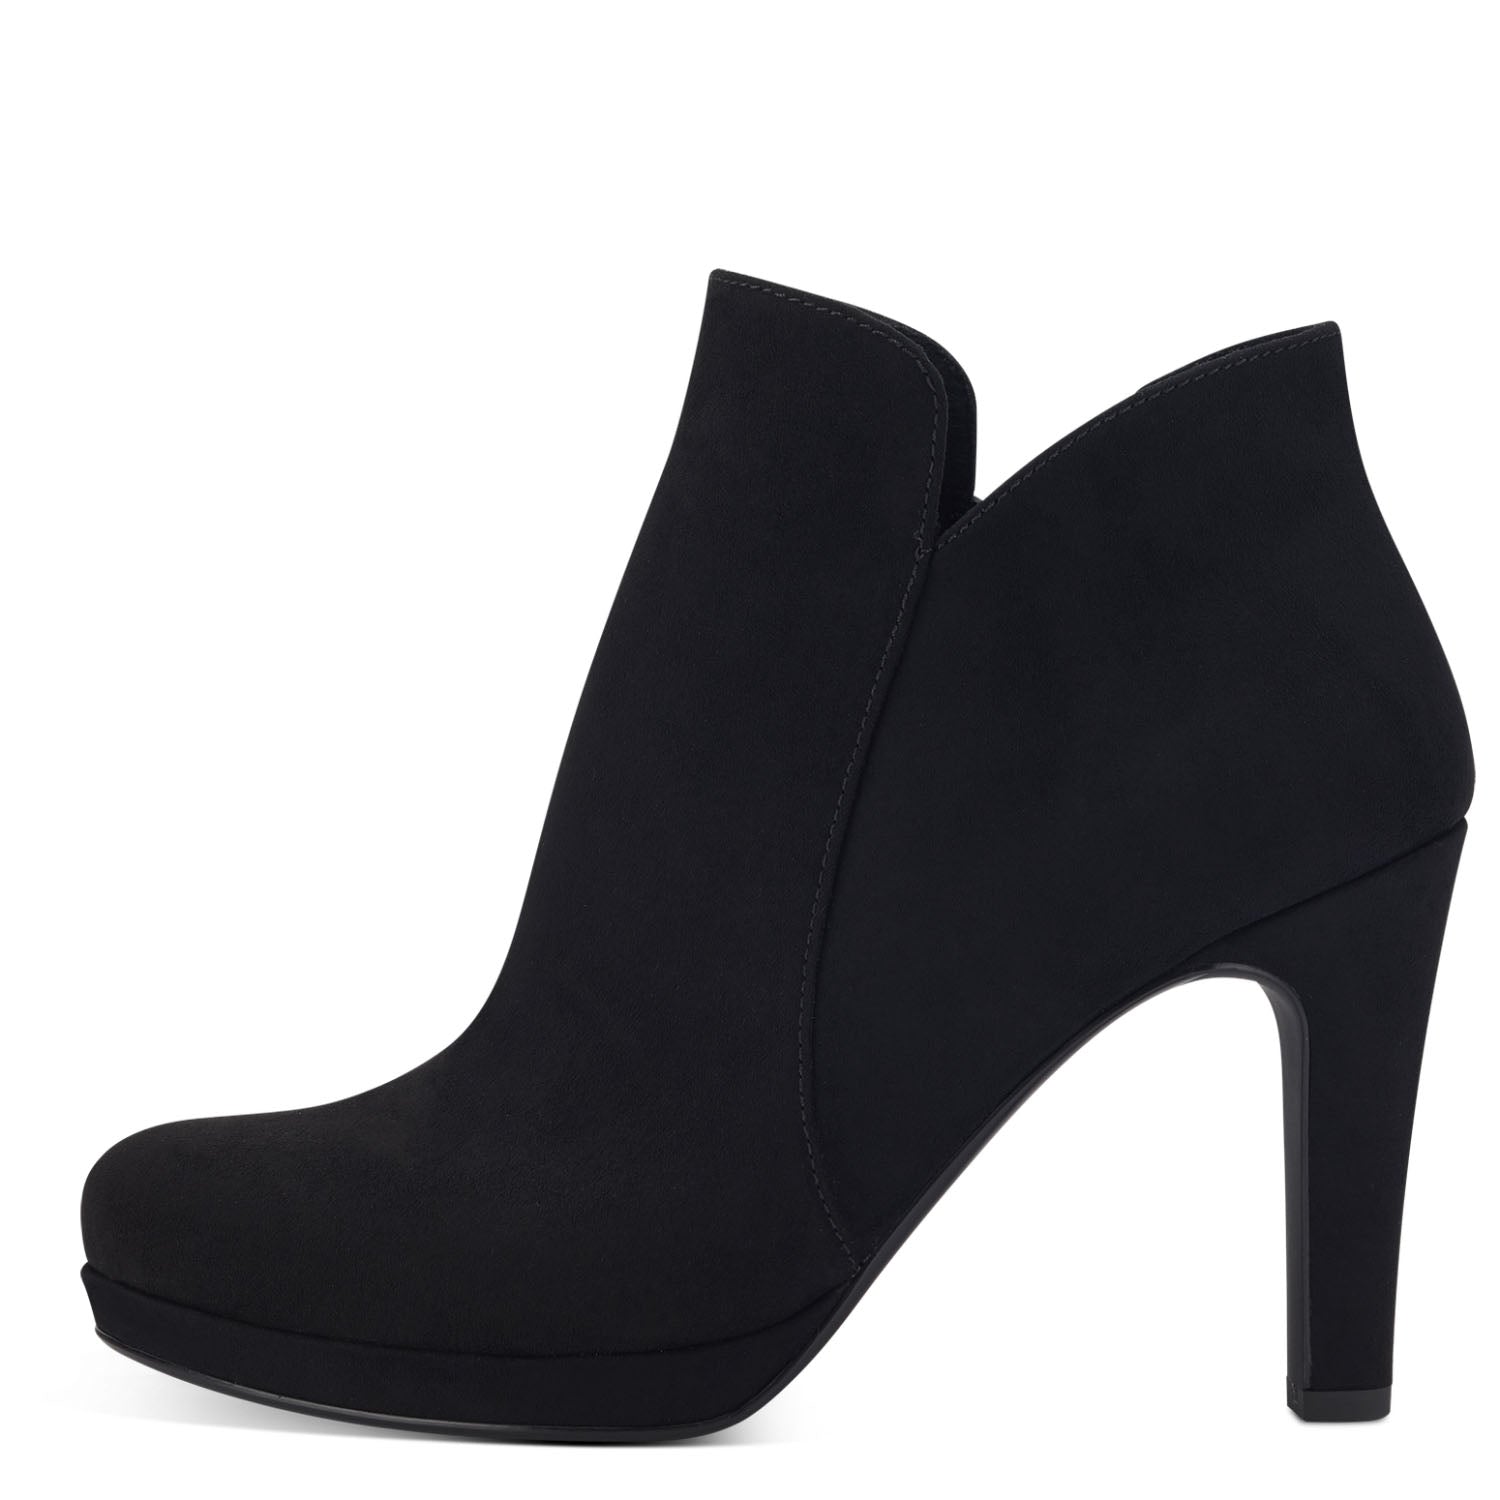 Front view of the Dressy Heeled Ankle Boot